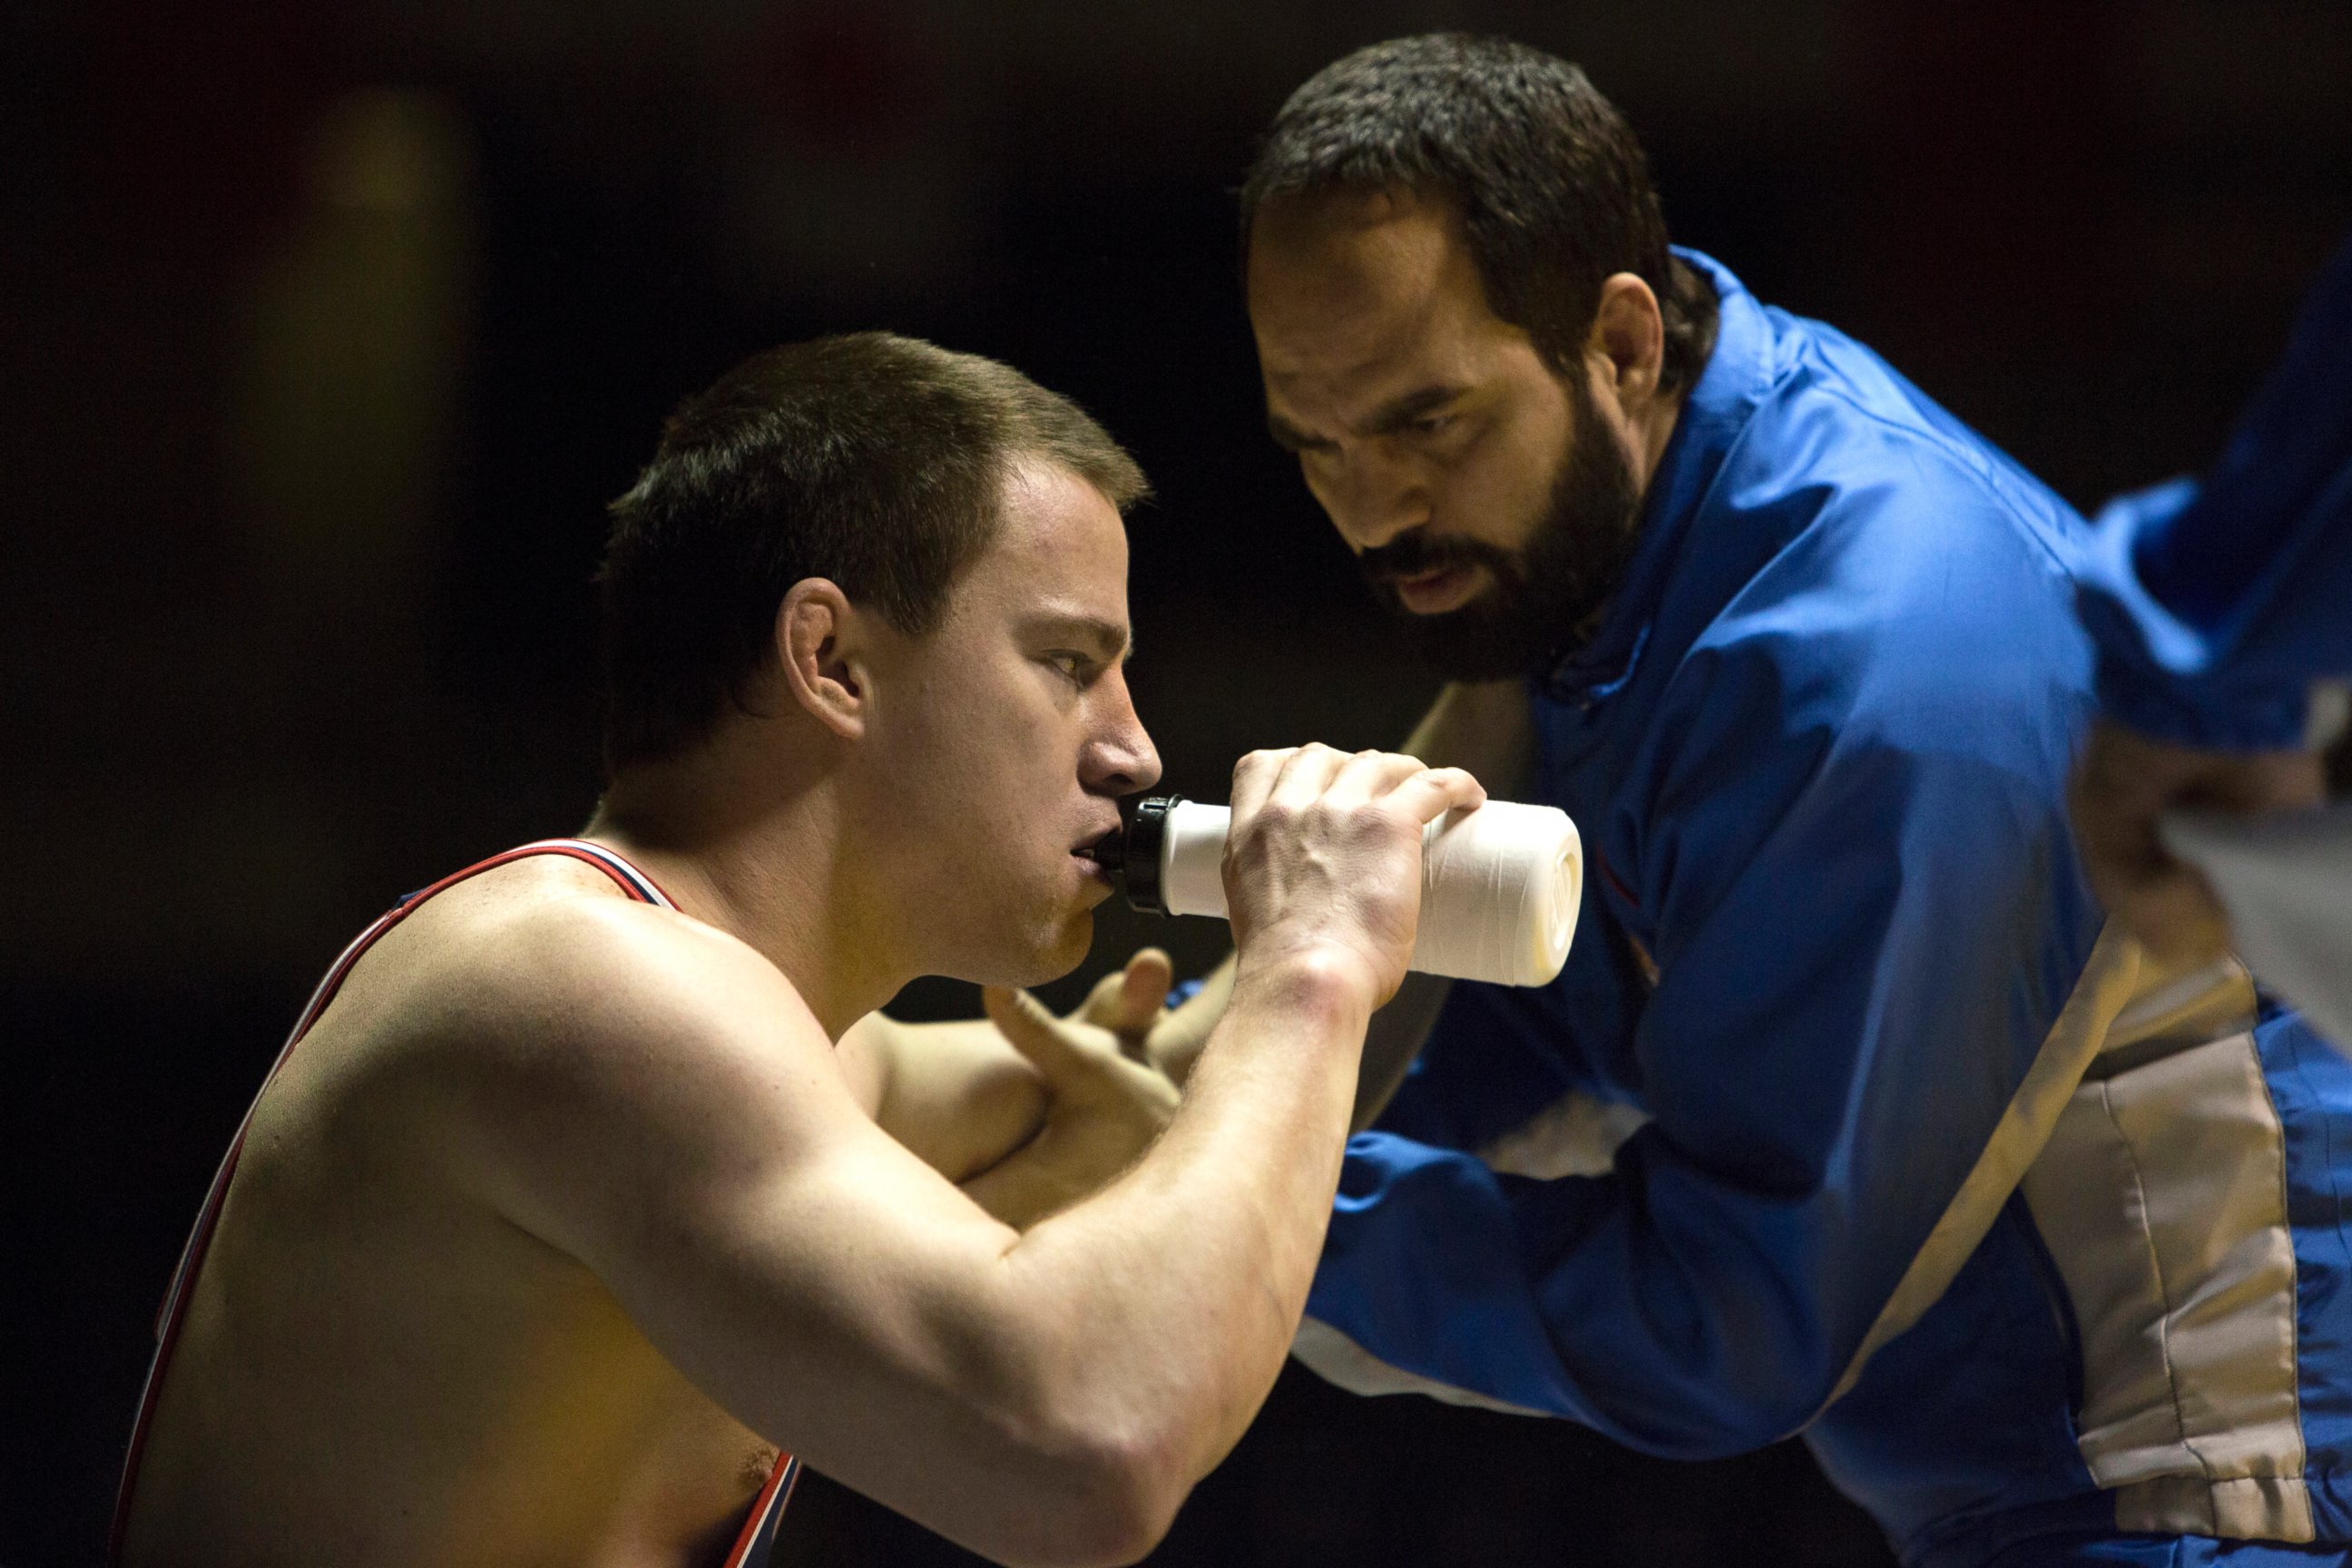 PHOTO: Channing Tatum and Mark Ruffalo in a scene from "Foxcatcher."